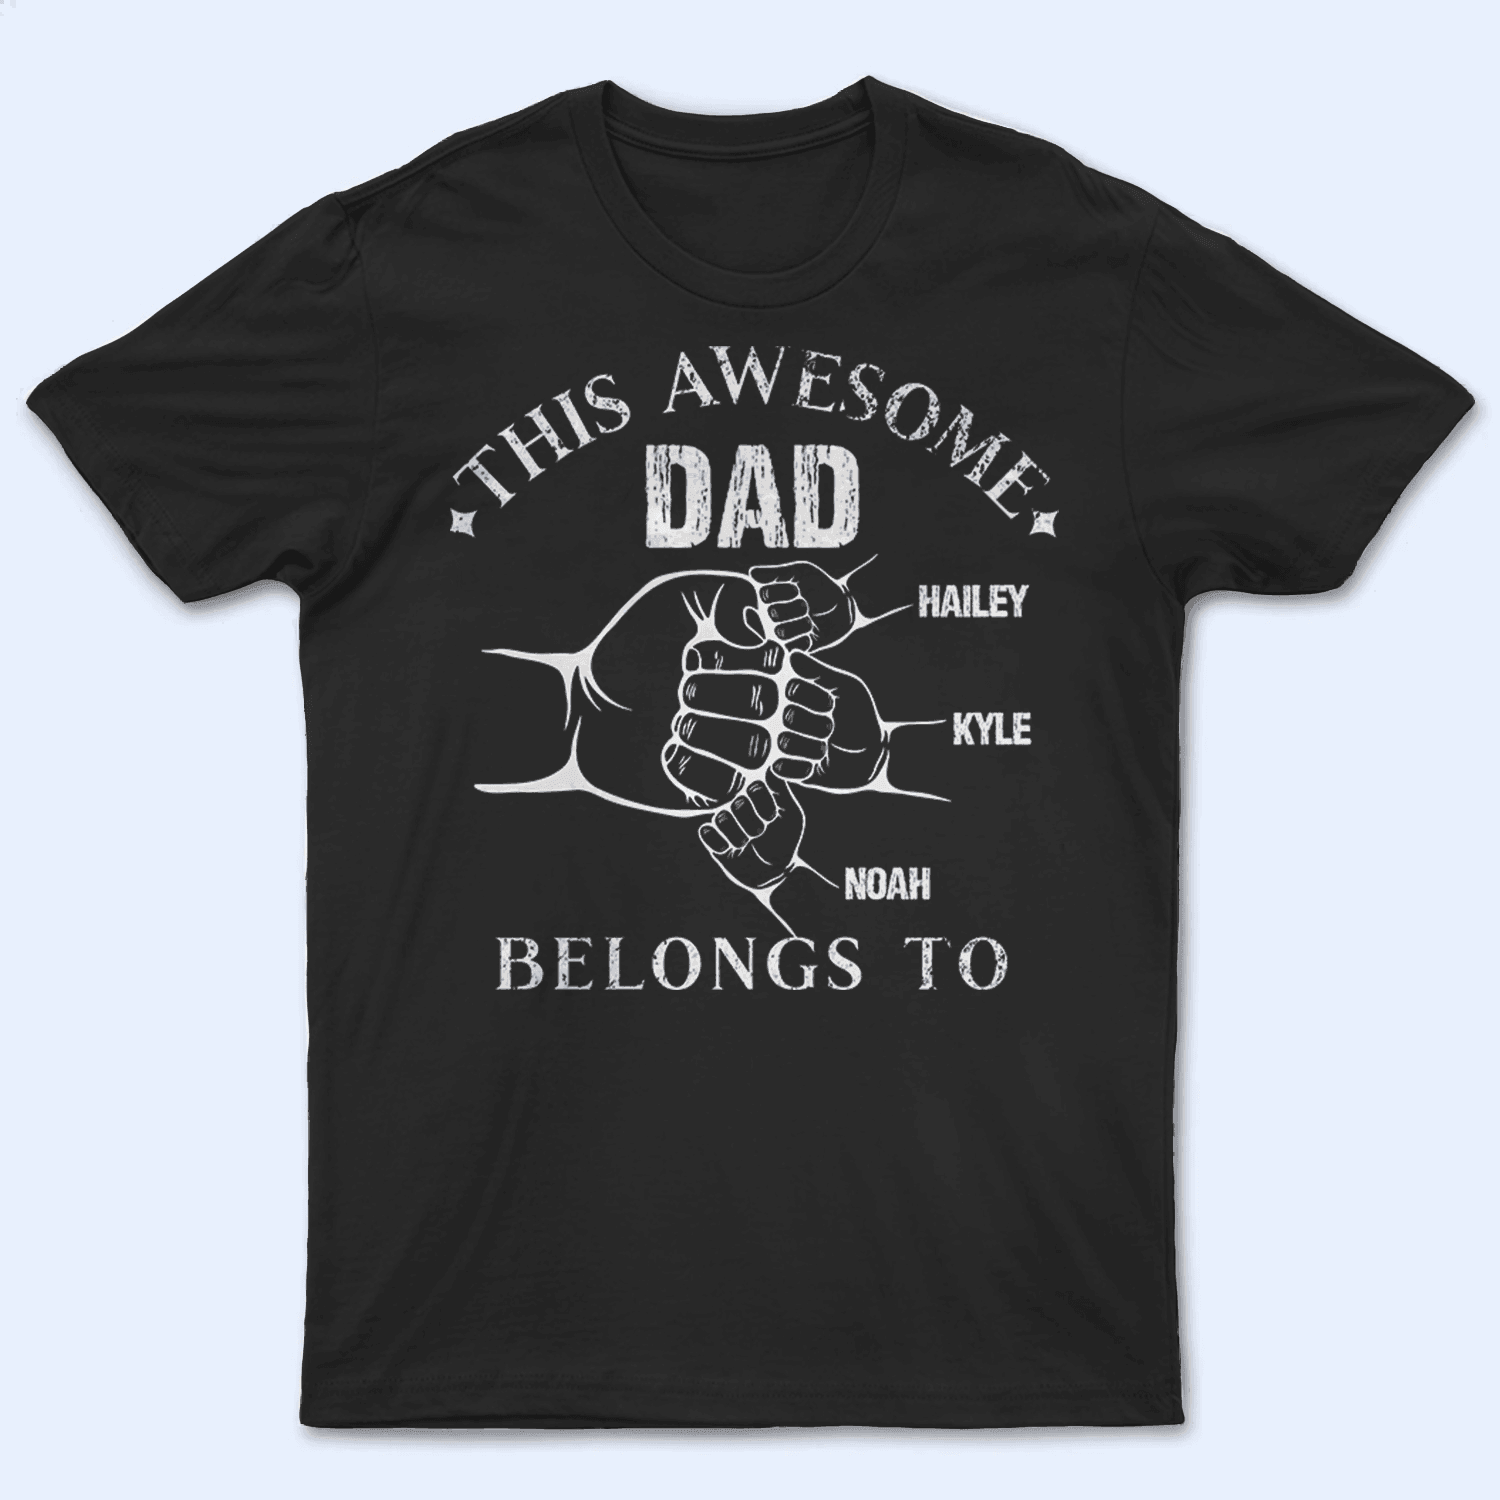 This Awesome Dad Belong To - Personalized Custom T Shirt - Birthday, Loving, Funny Gift for Grandfather/Dad/Father, Husband, Grandparent - Suzitee Store